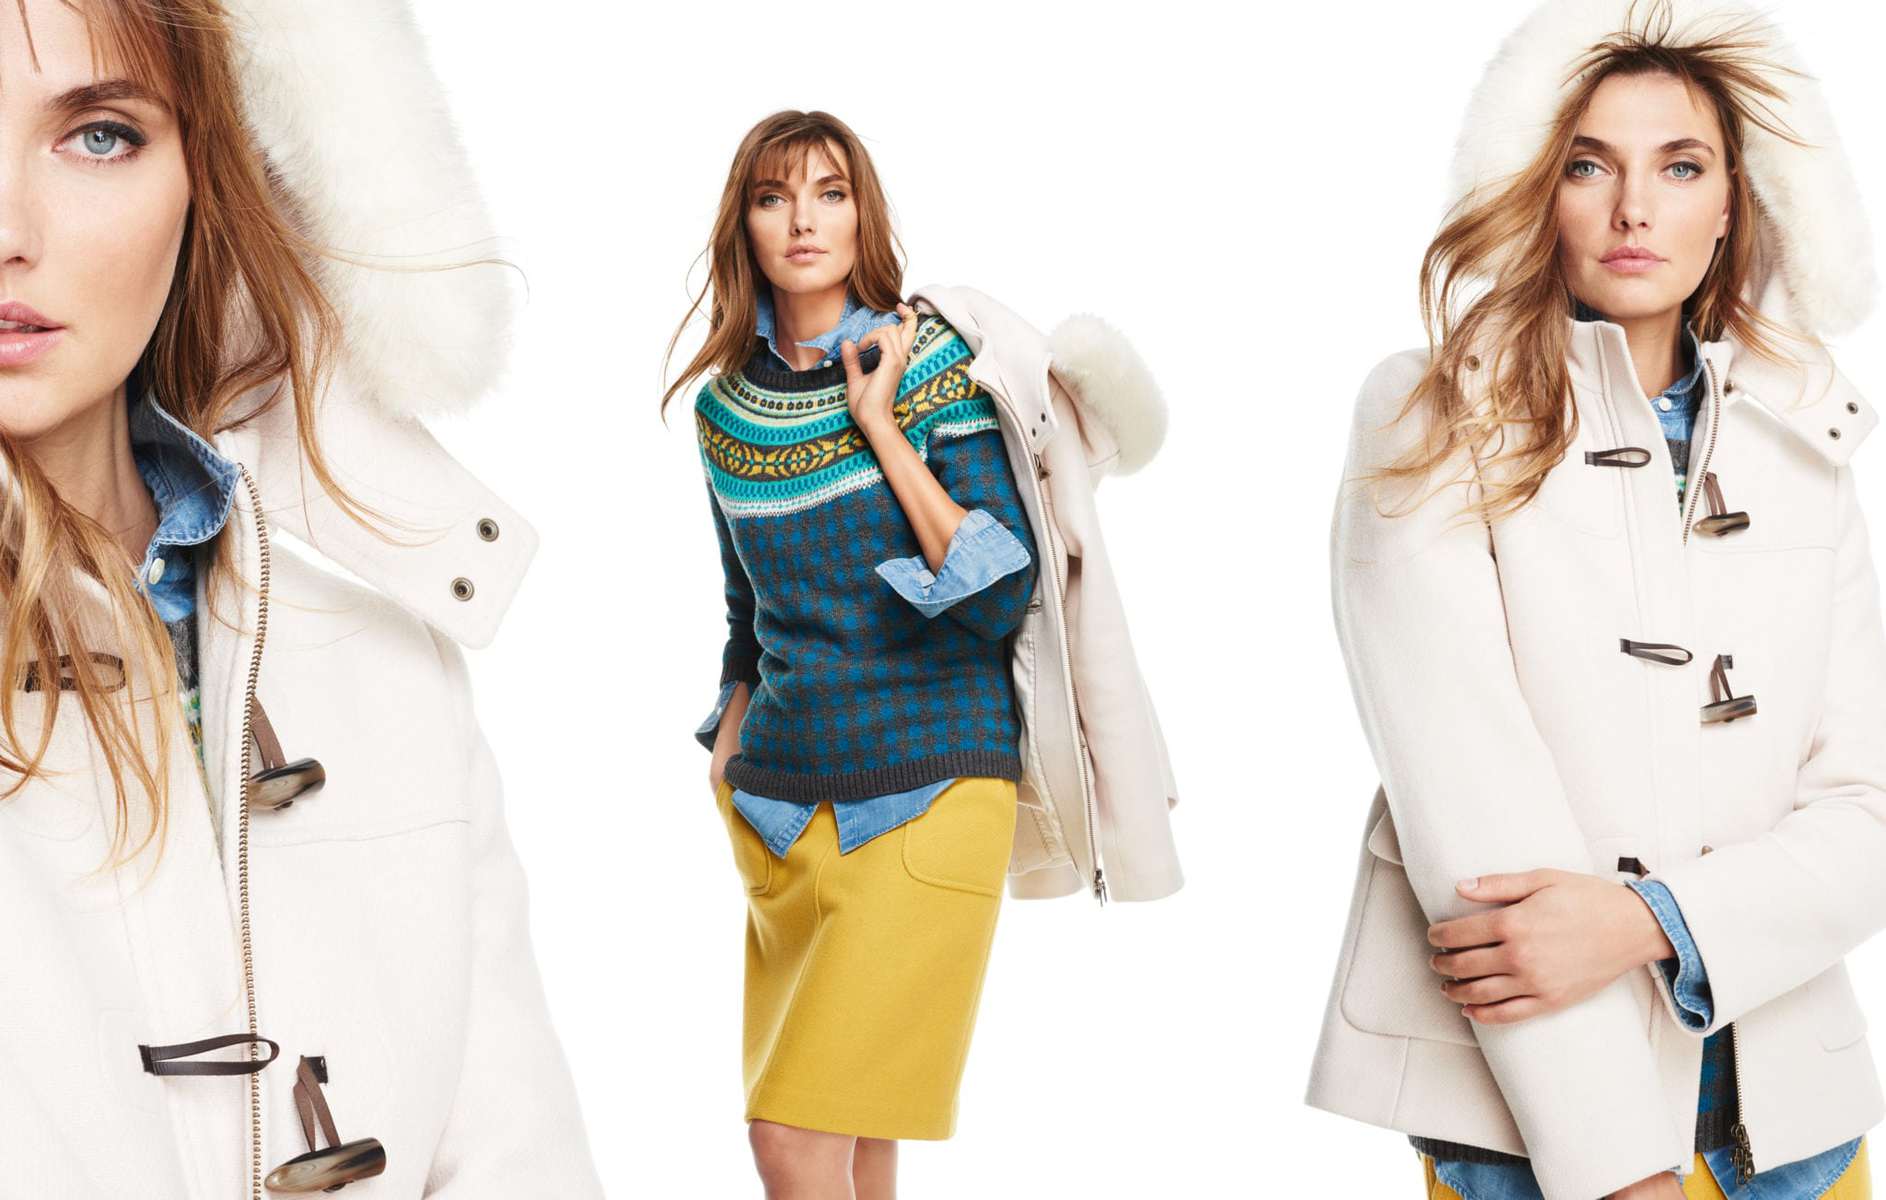 Talbots Fall 2015 Look Book Preview Featuring Blue Fair Isle Sweater with Yellow Skirt